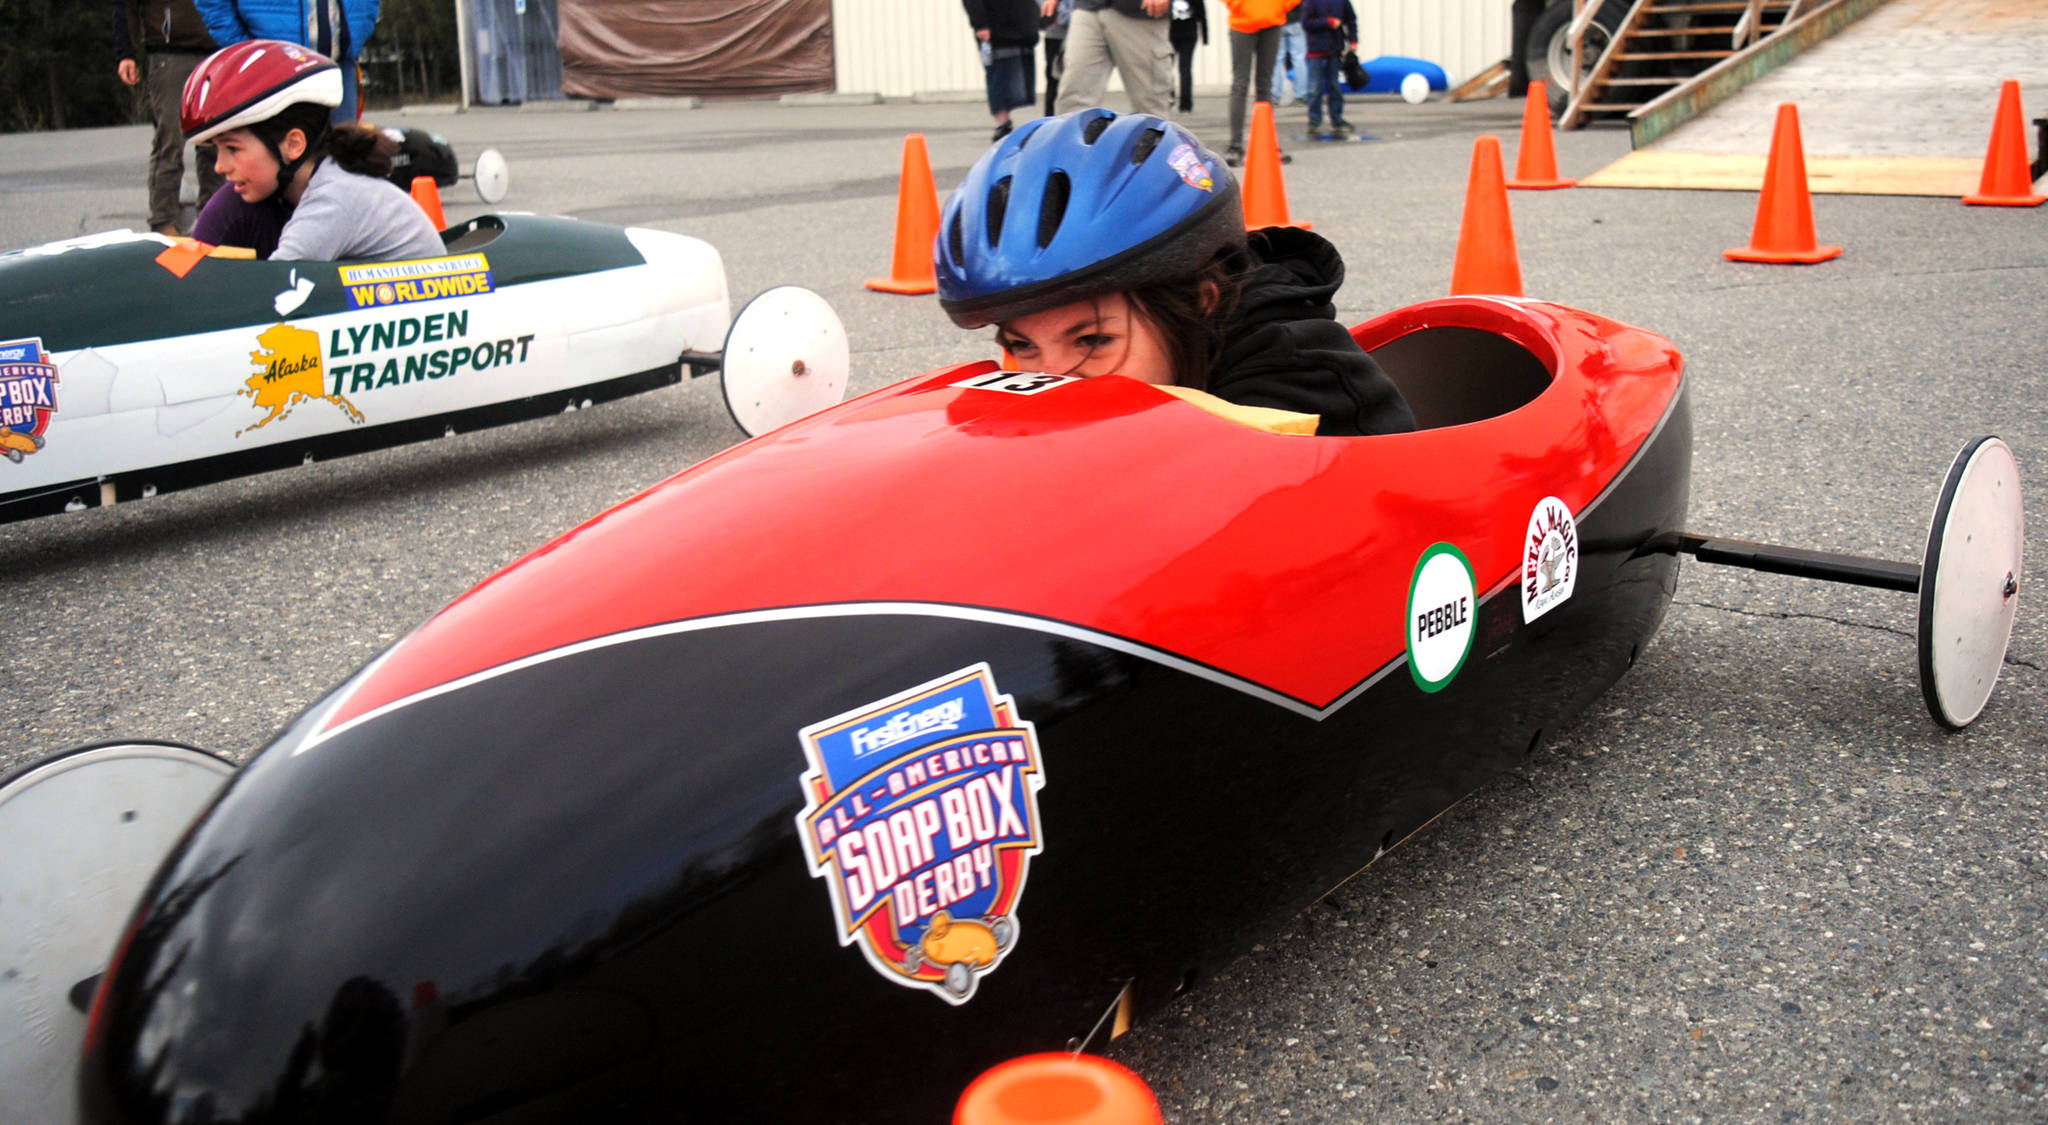 Dustin Hill, of Kenai, races down the track at the All-American Soap Box Derby on Saturday, May 20, 2017 in the Kenai Municipal Rink parking lot in Kenai, Alaska. The Kenai Rotary Club has hosted the derby for ten years and aims to empower local youth through hard work and creativity in designing and building cars, the spirit of competition on race day and sportsmanship and comradery. The derby is the only Soap Box Derby race in Alaska. (Kat Sorensen/Peninsula Clarion)